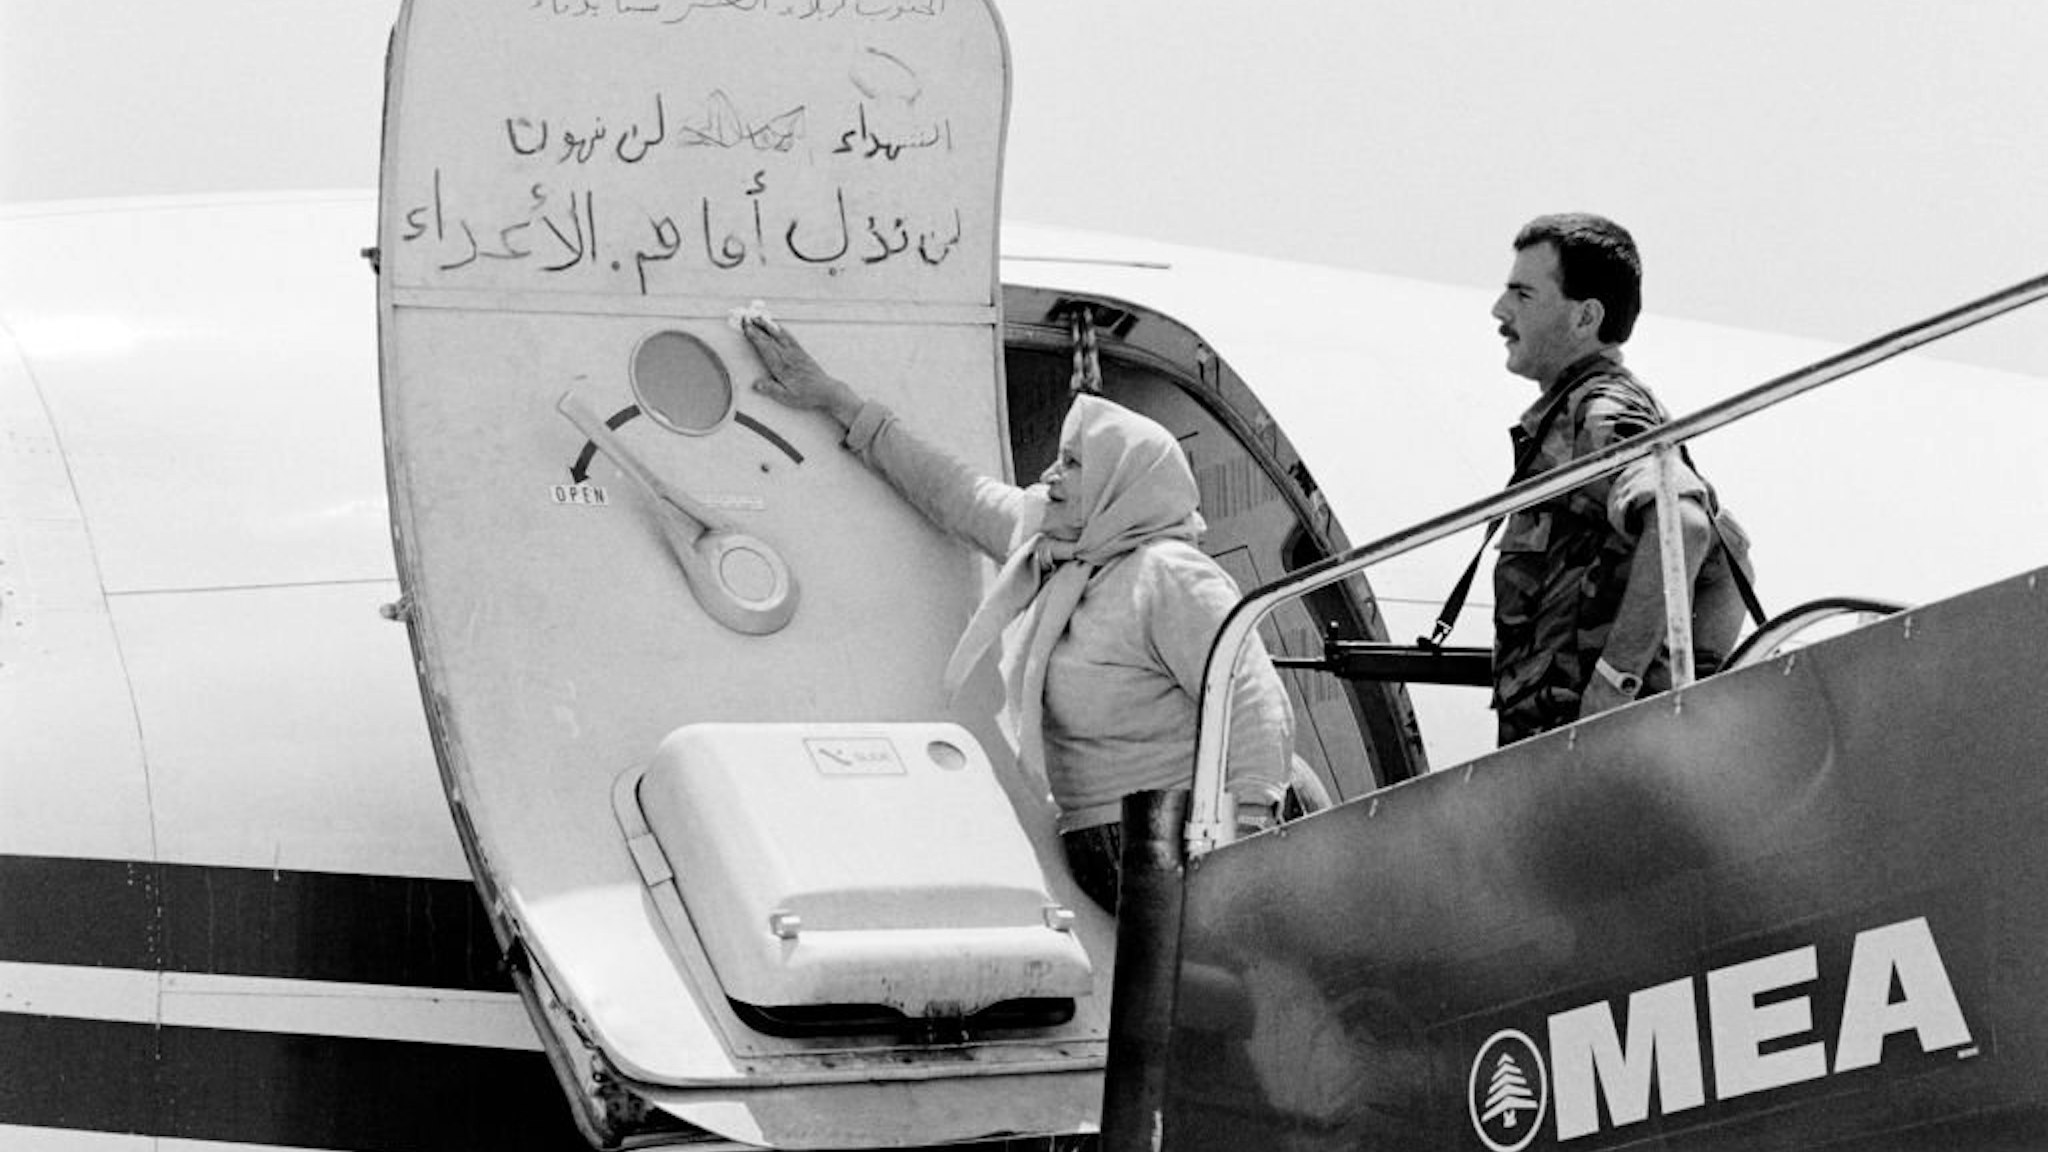 A Lebanese woman cleans the slogans which have been writting by the hijackers on the door of the TWA plane, on July 6, 1985 at Beirut airport.